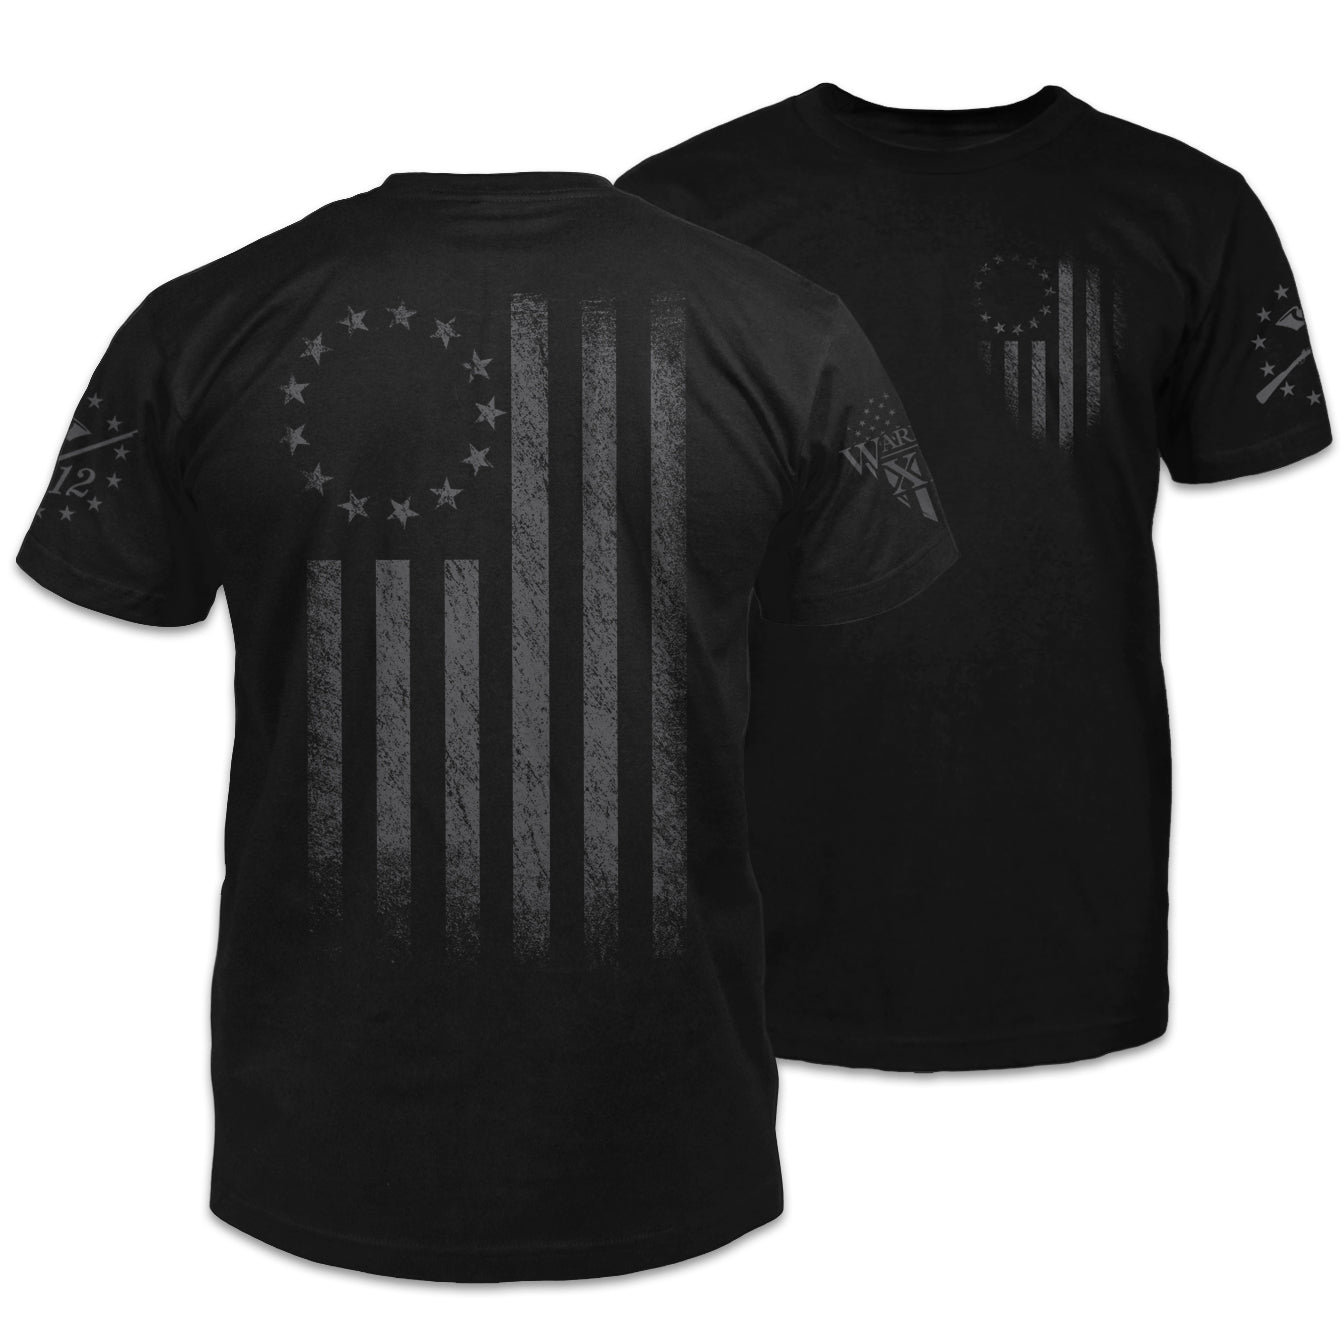 A front and back black t-shirt with the Tactical Betsy Ross flag shirt that pays tribute to the ideas which the United States of America was founded on. 